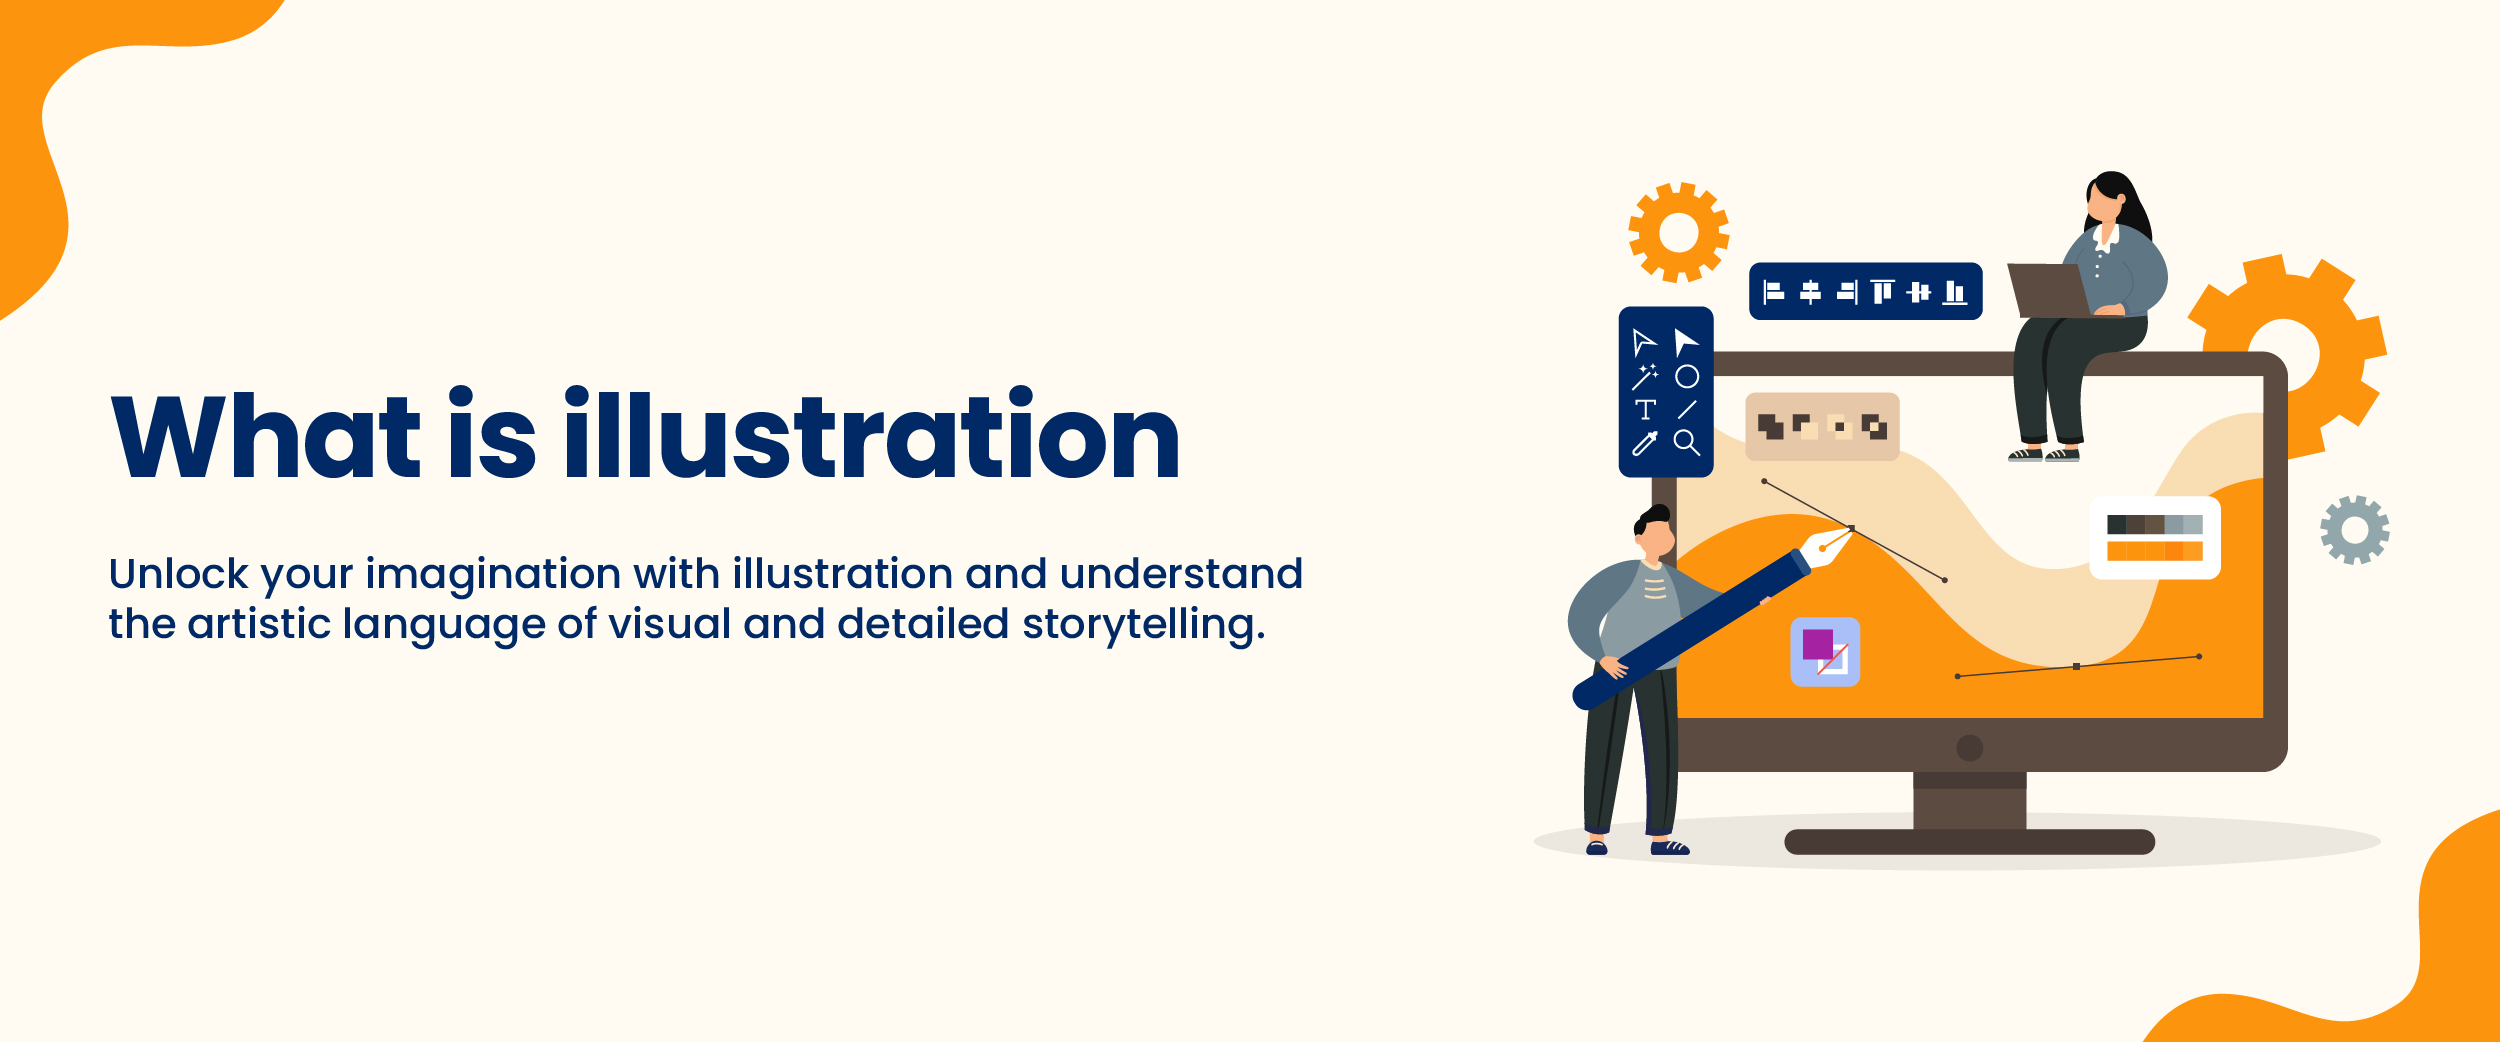 what is the meaning of illustration